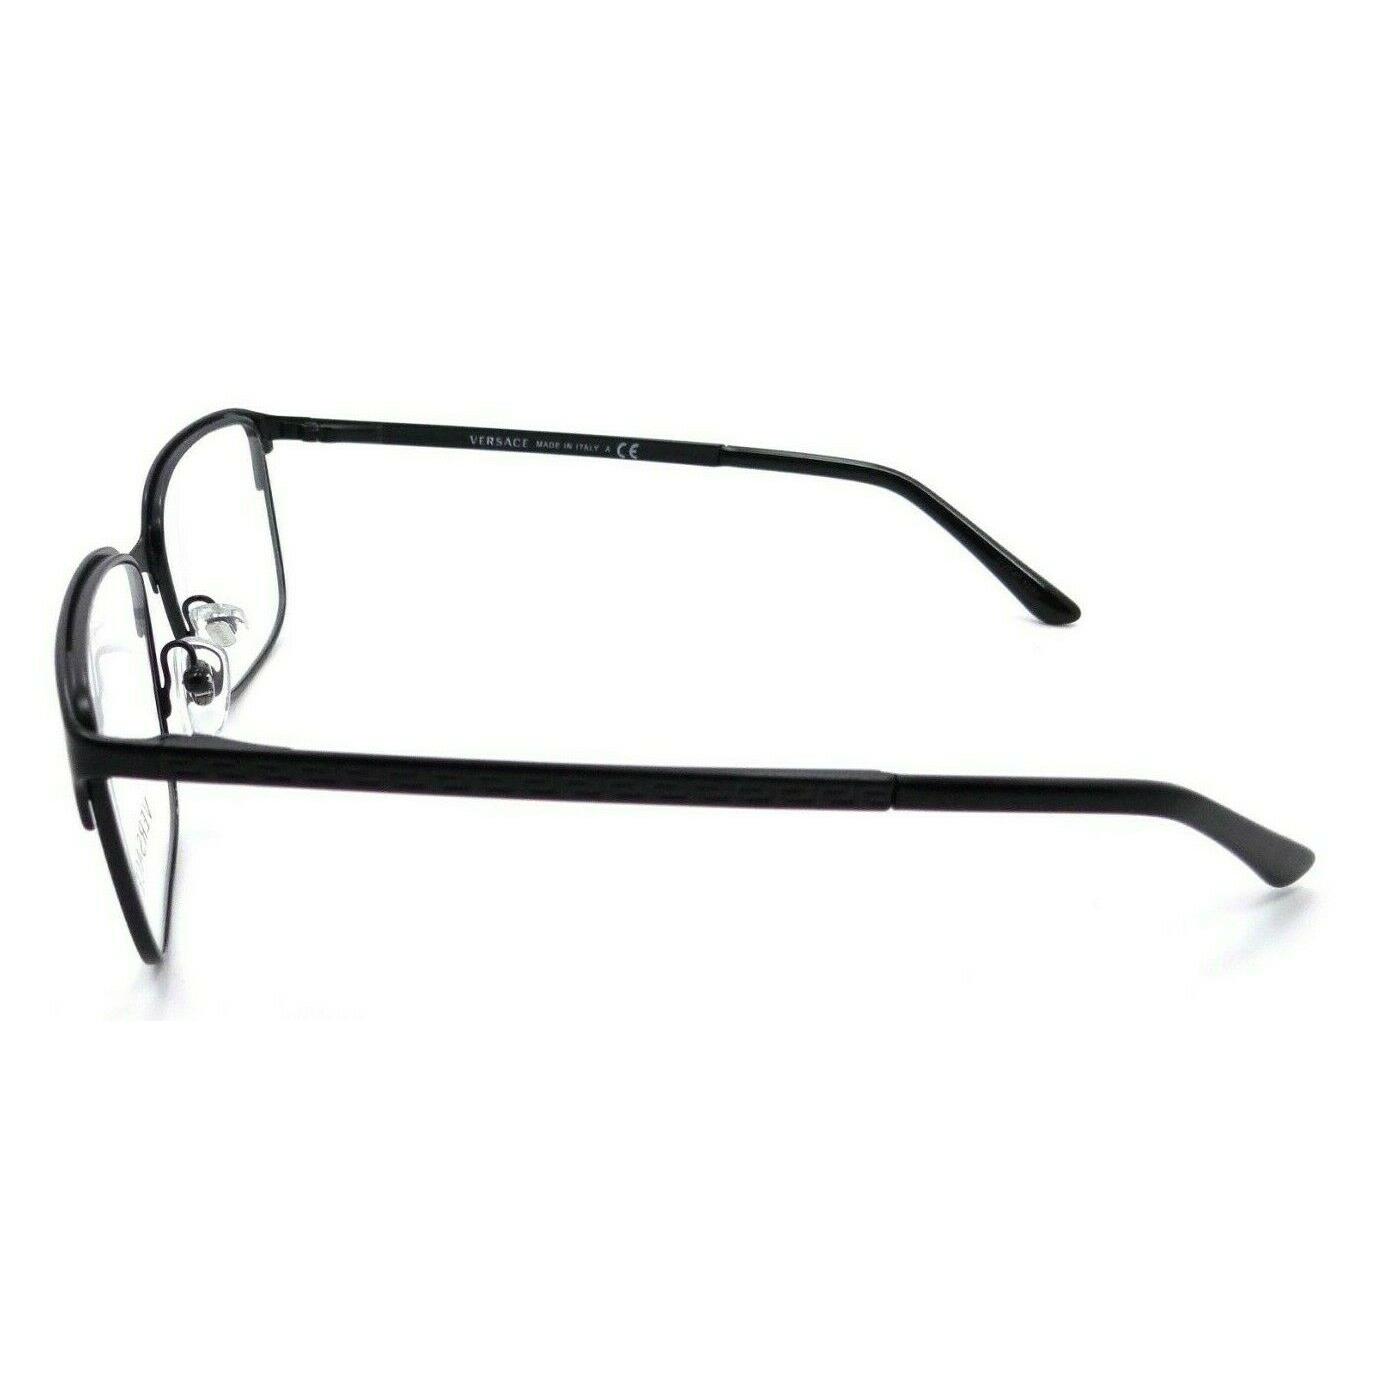 Versace eyeglasses  - MATTE BLACK Frame, Clear, Ready for your RX Lens, 1261 Code 1